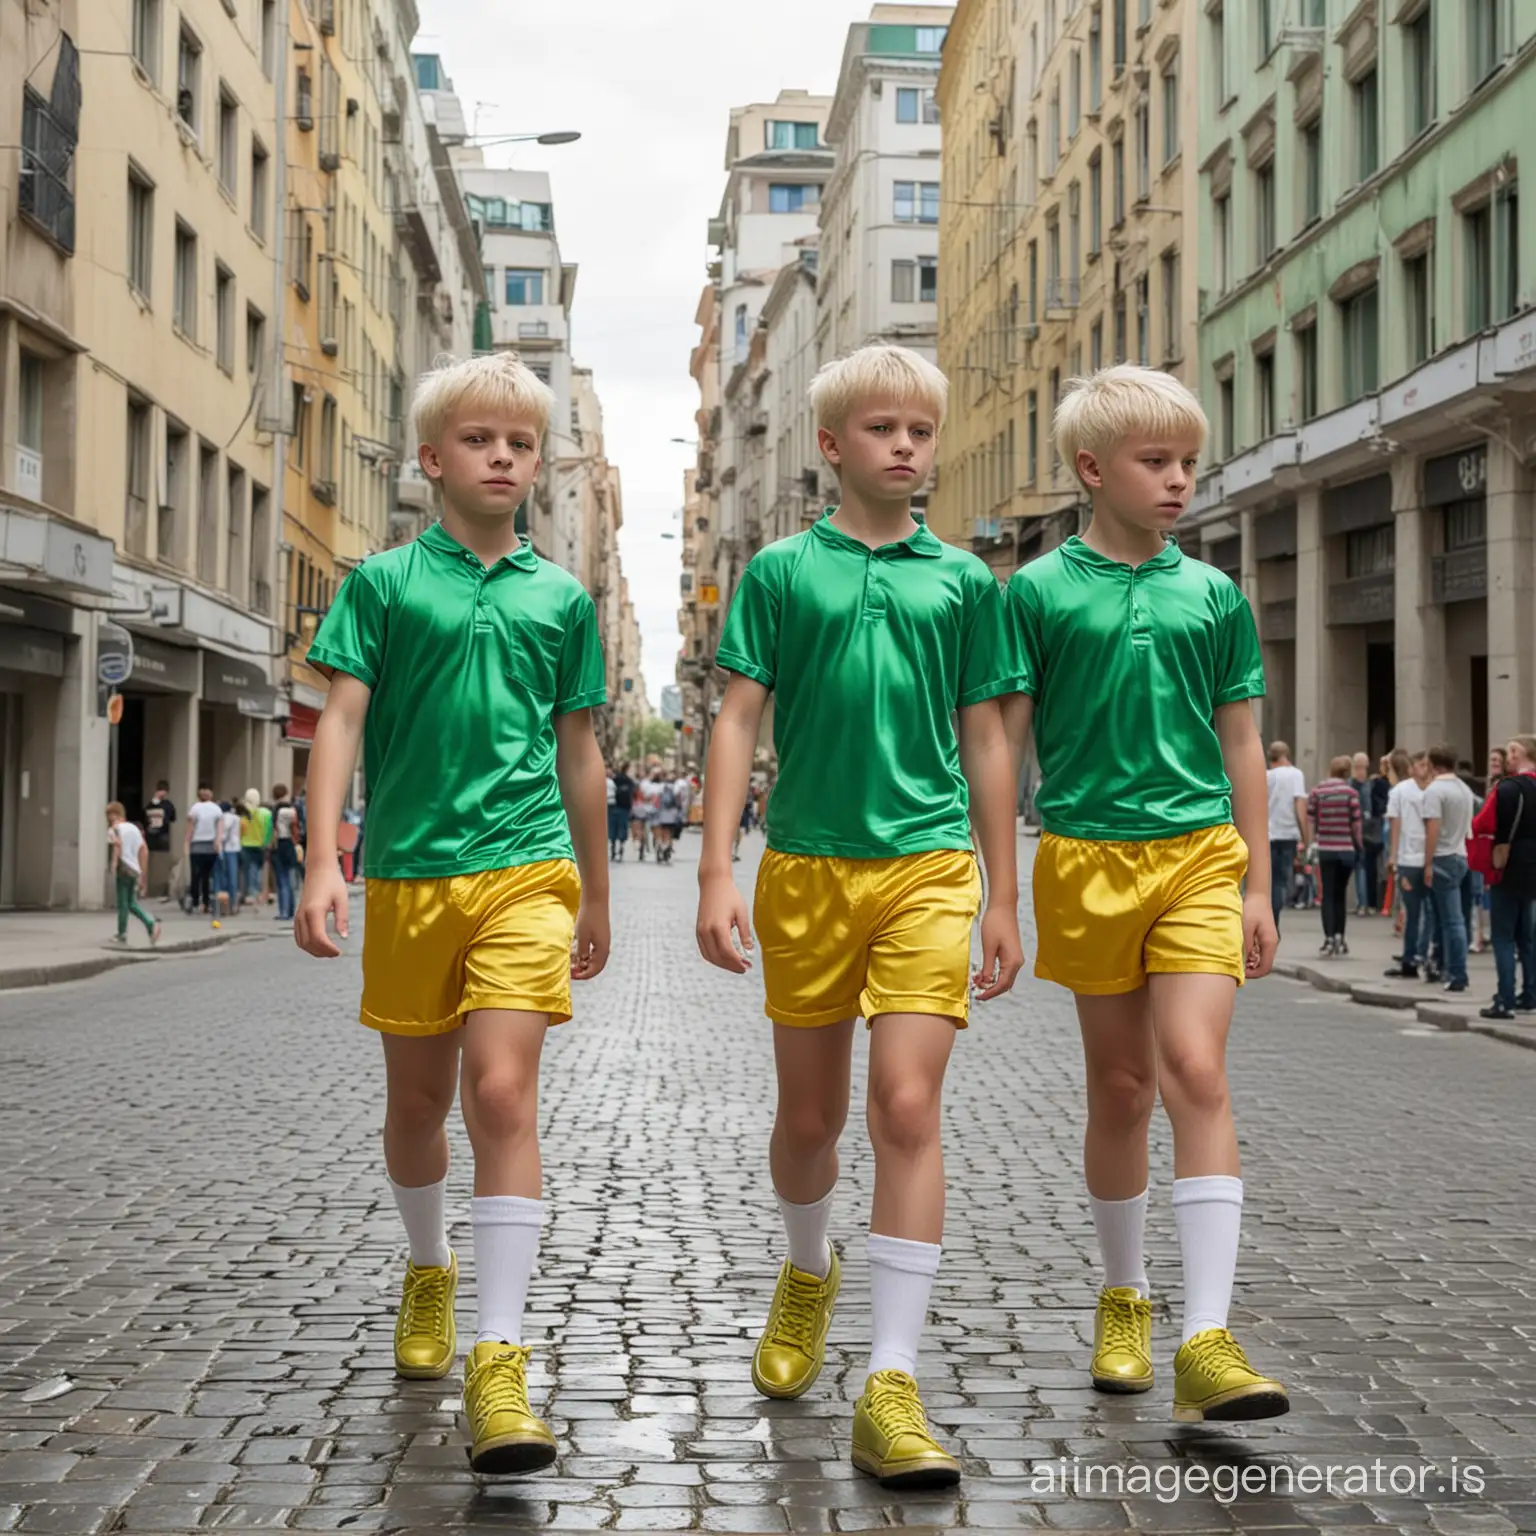 Three blond boys of 14 years old in short shiny satin green shirts, very short green shorts with a yellow belt, white knee socks, green sneakers. The boys walk through the square of the city of the future, all the buildings are made of shiny metal and glass.